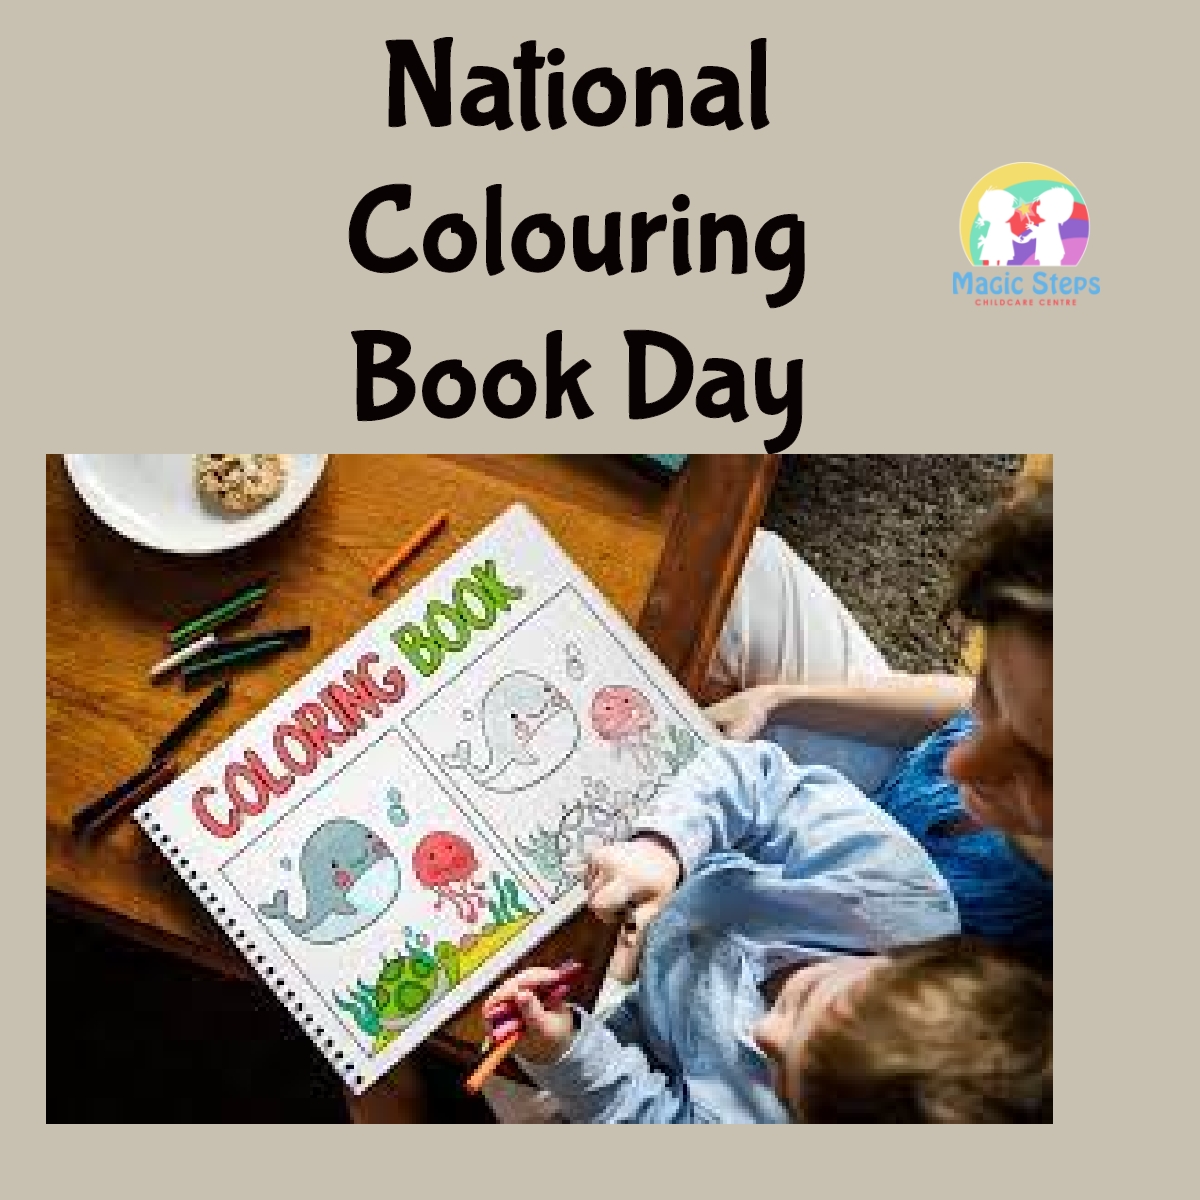 National Colouring Book Day- Tuesday 2nd August